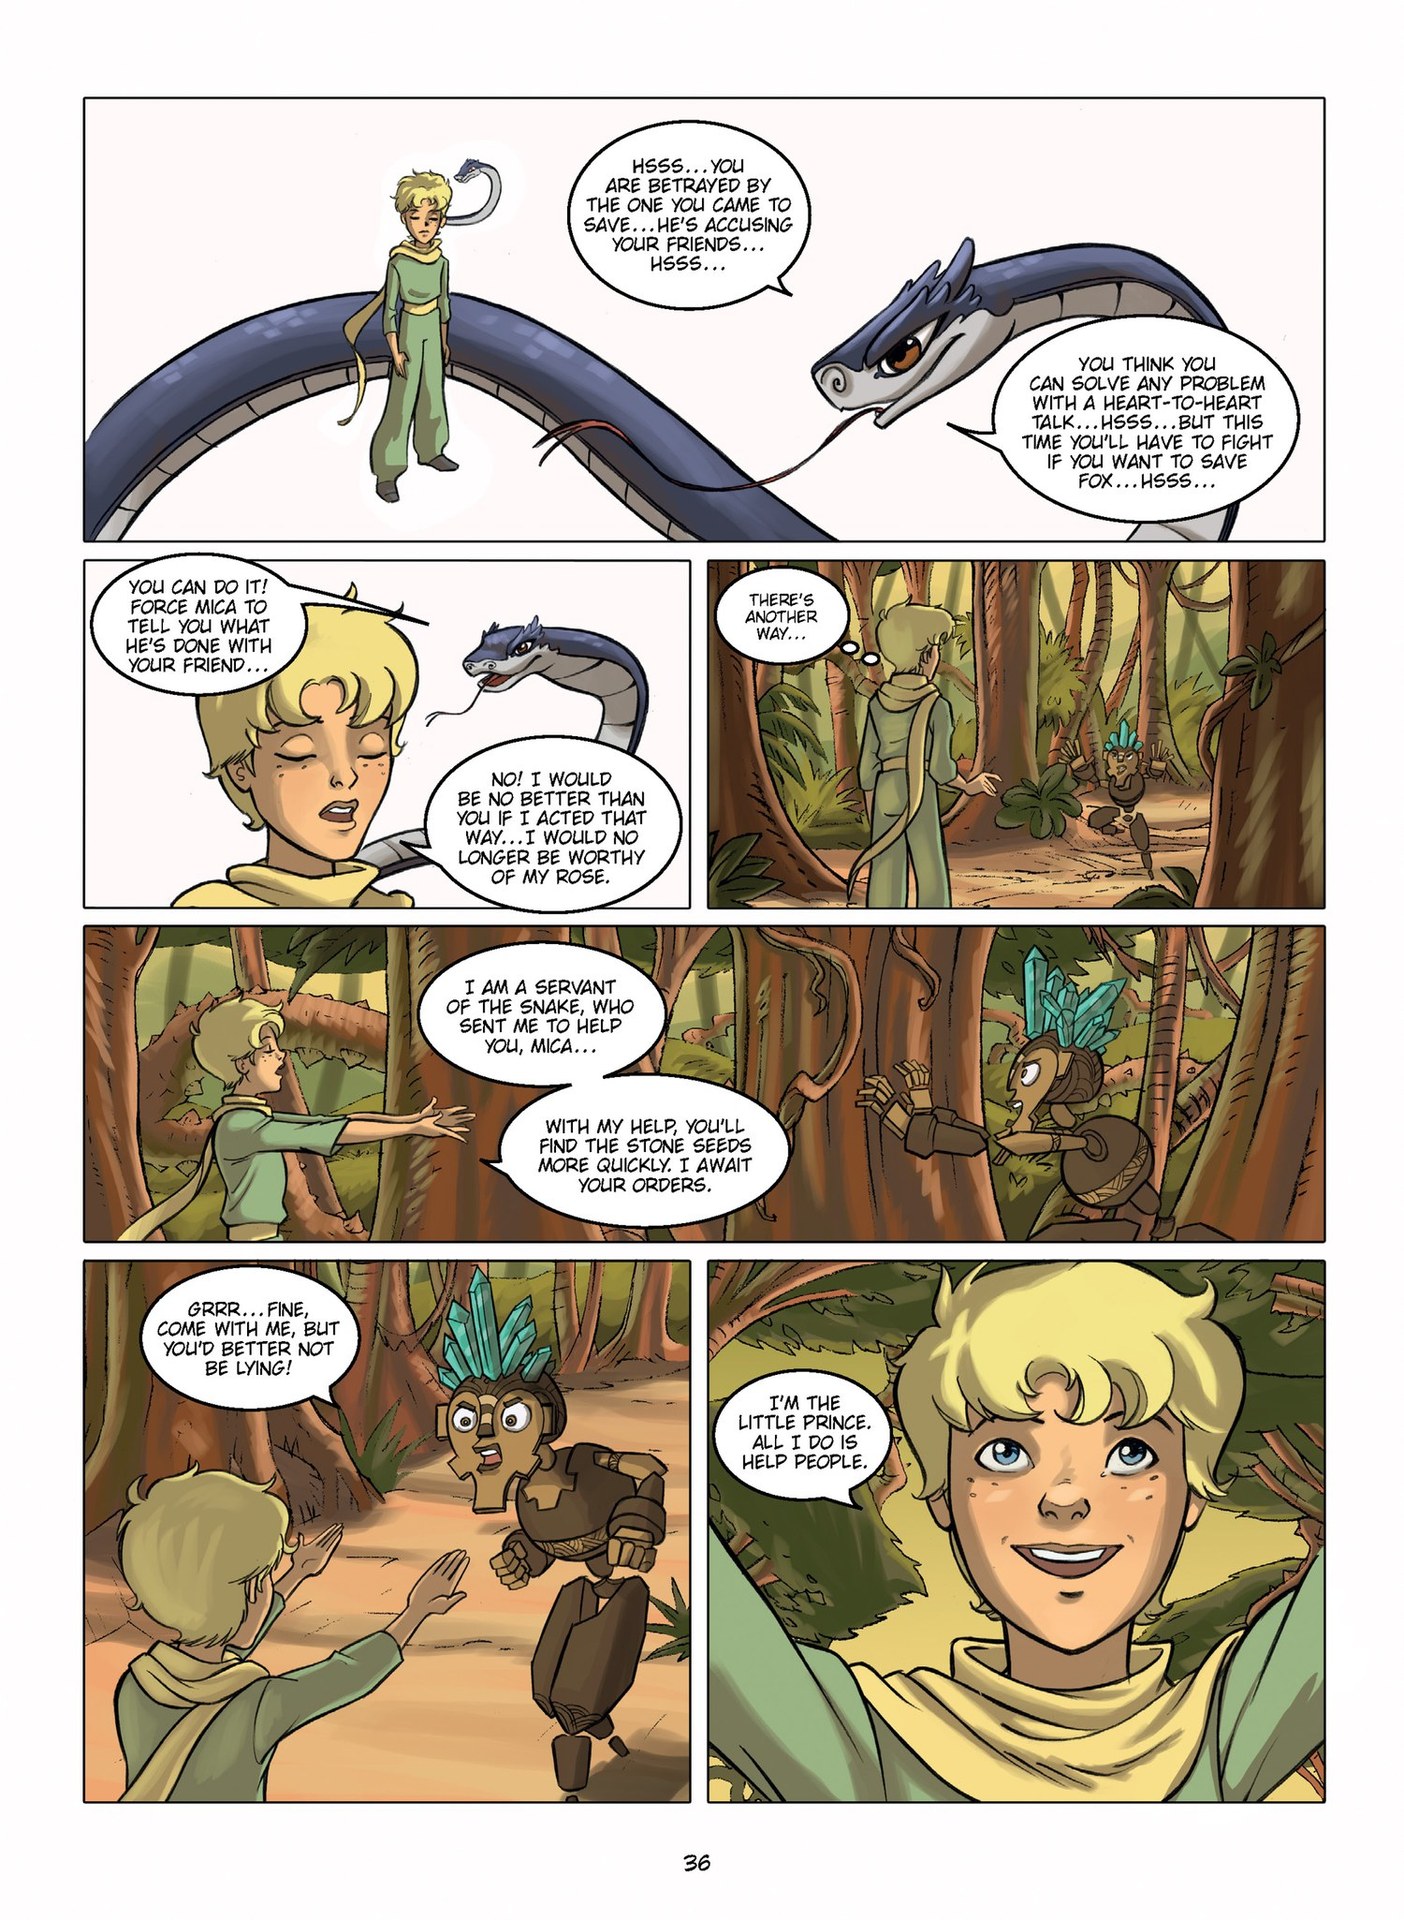 Read online The Little Prince comic -  Issue #4 - 40